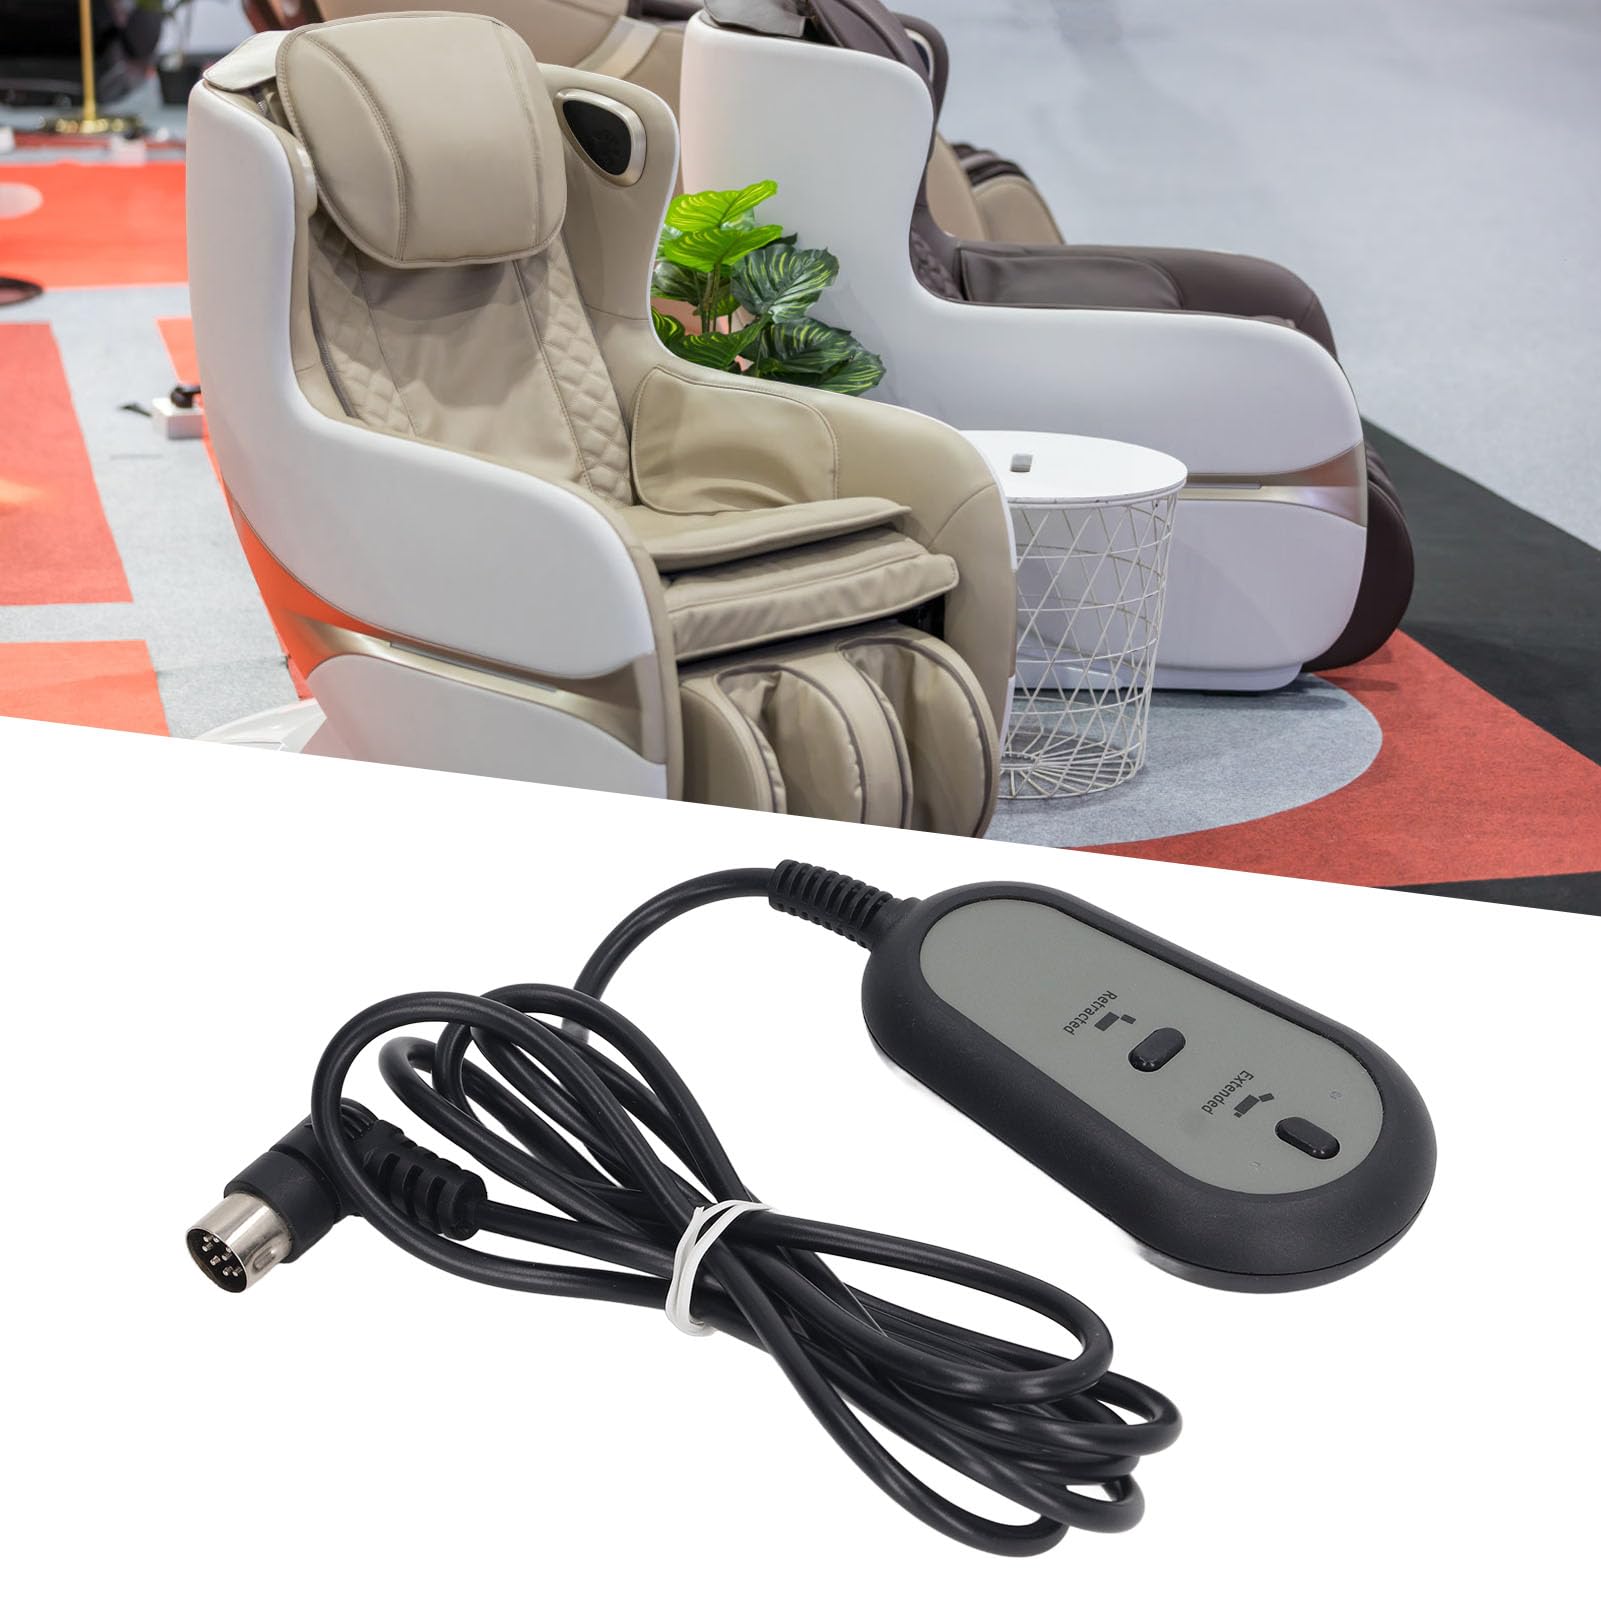 YOUTHINK Power Recliner Controller, Up and Down 2 Button 8 Pin Remote Handset Controller Hand Controller Power Recliner for Lift Chair